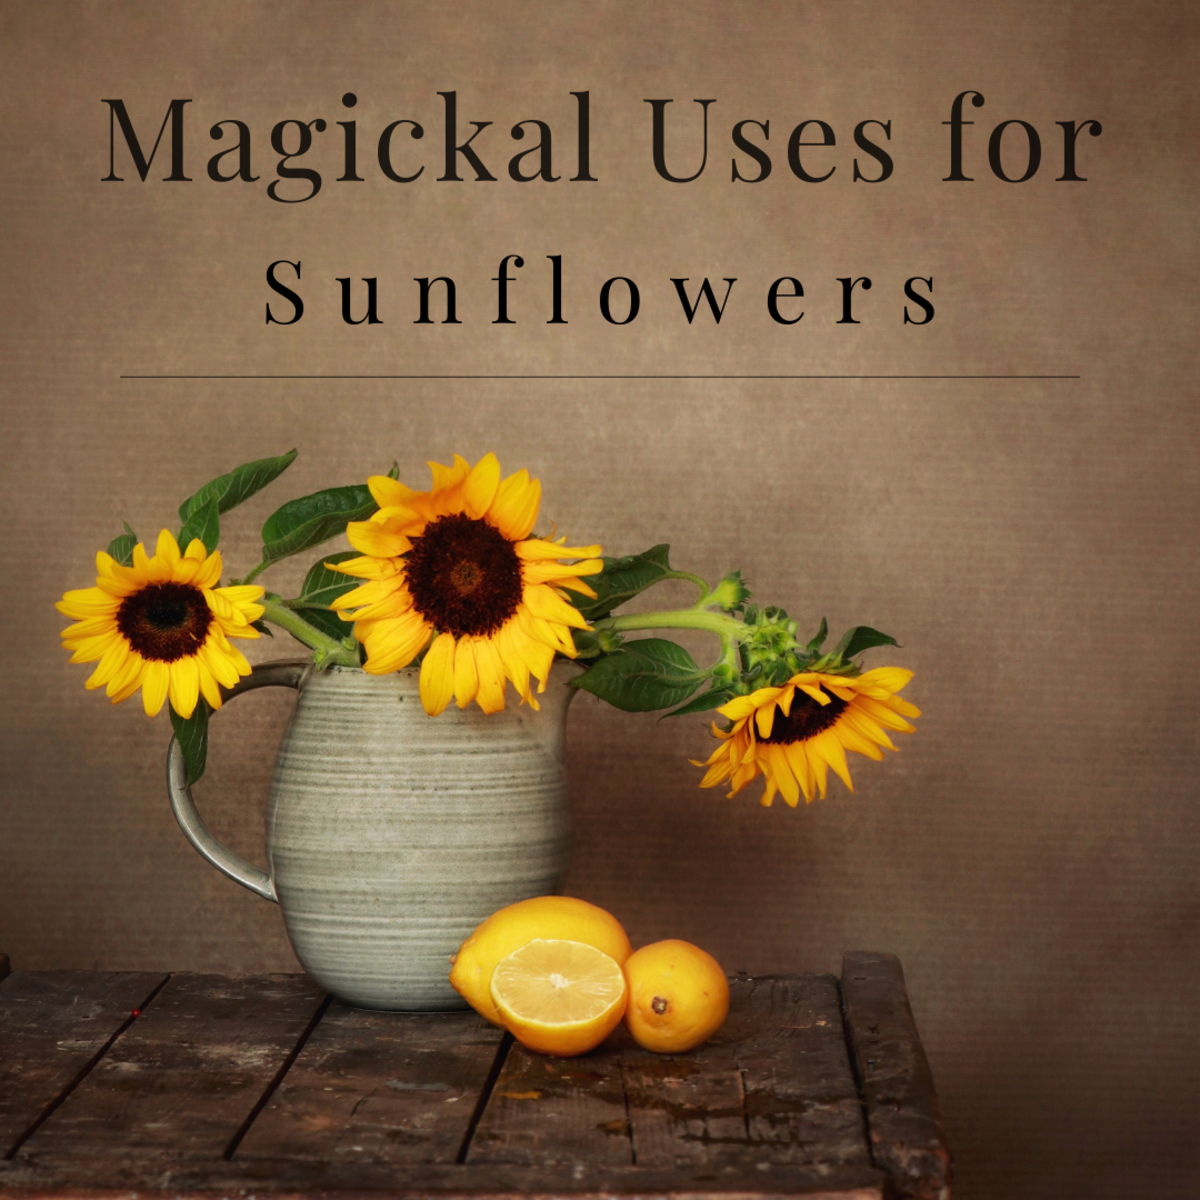 Sunflowers can enhance your magickal practice in multiple ways!